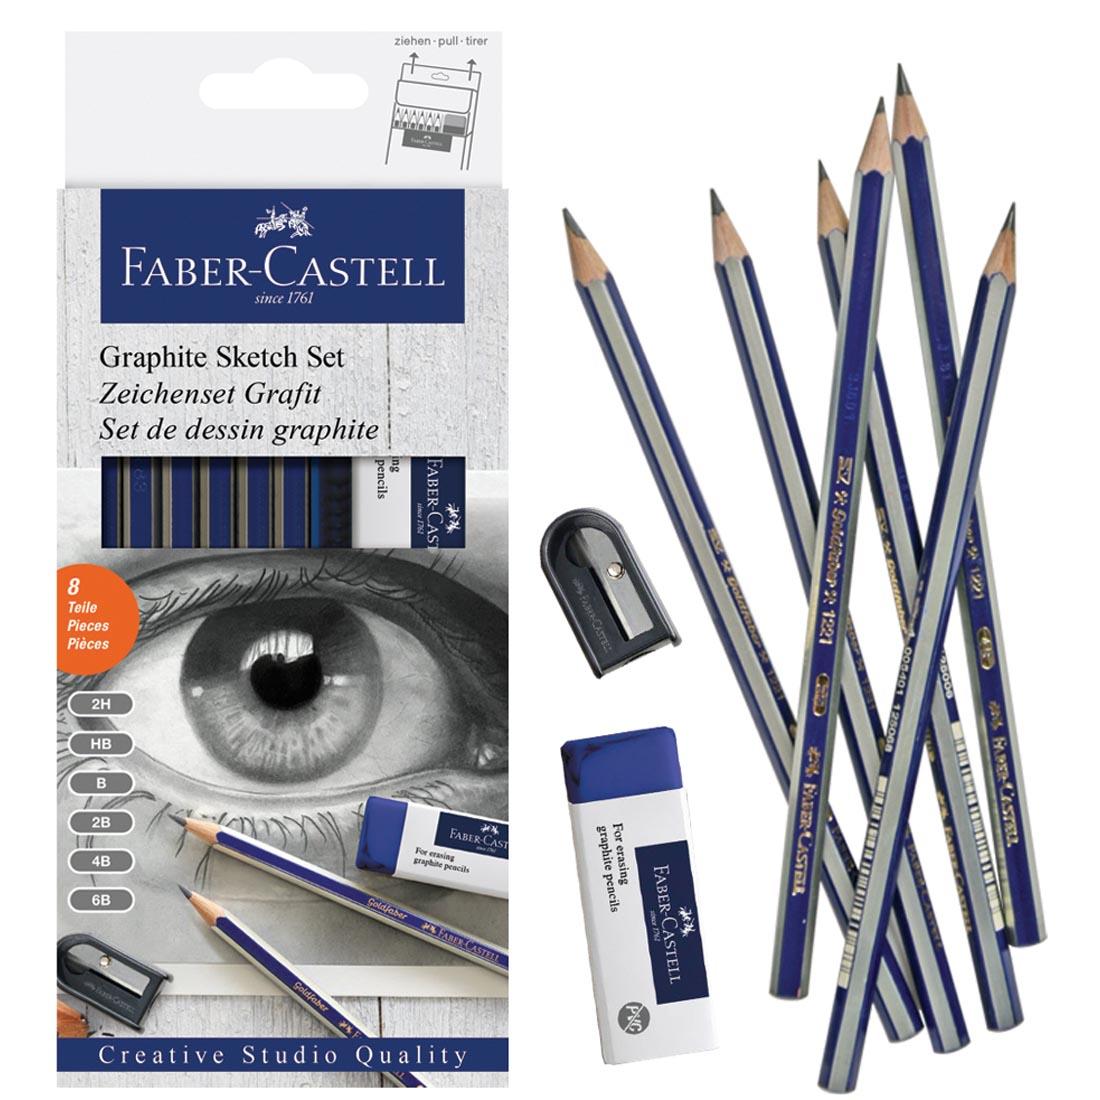 Six GoldFaber Graphite Pencils, an Eraser and a Sharpener, shown outside of package